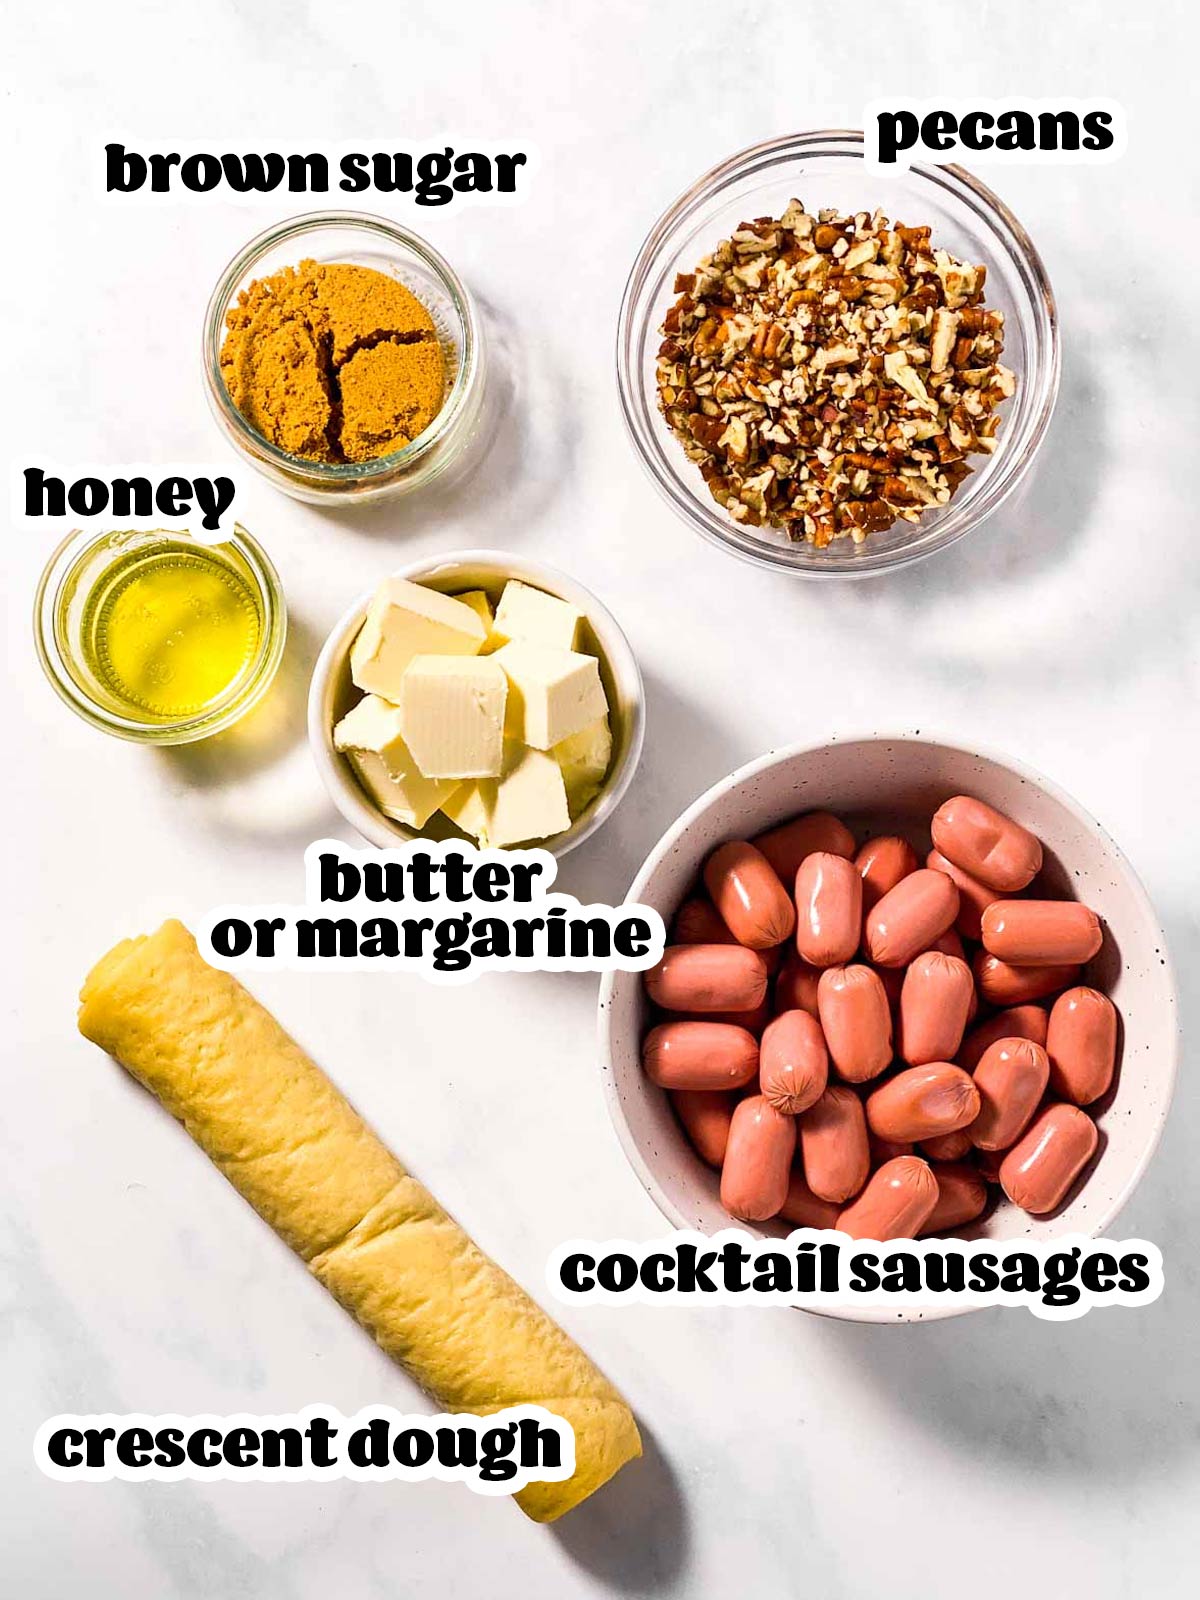 ingredients for sticky pecan little smokies in crescent rolls with text labels